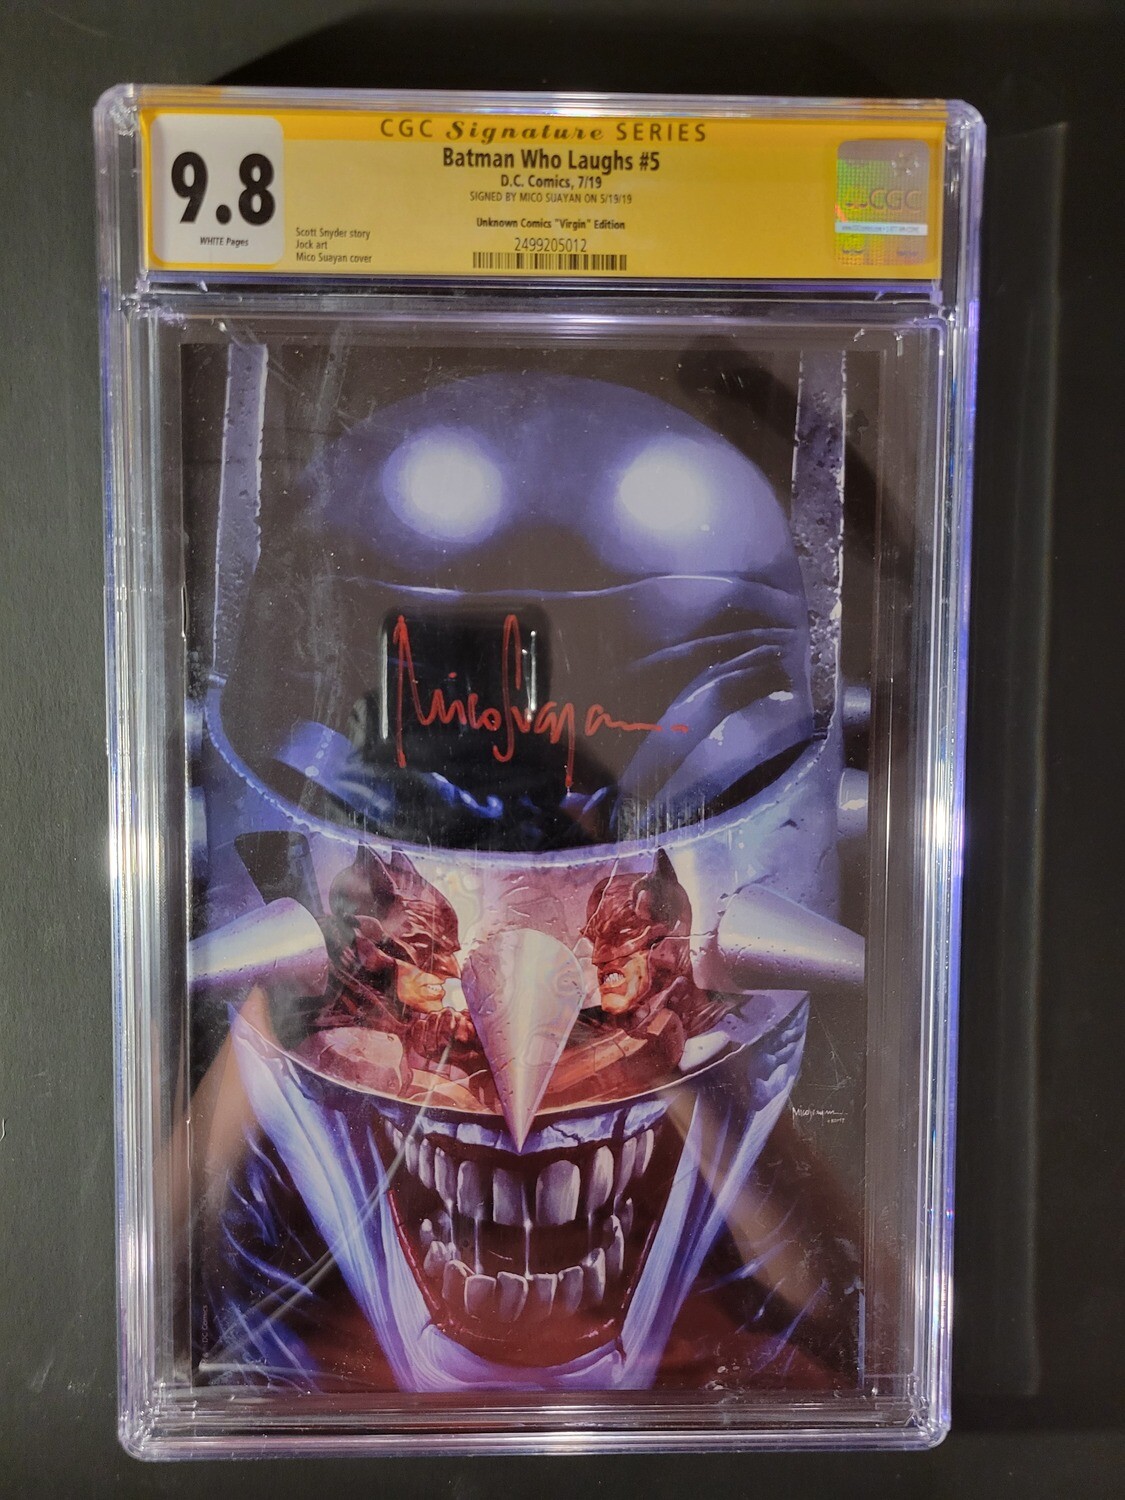 Batman Who Laughs #5 CGC 9.8 Signed by Mico Suayan